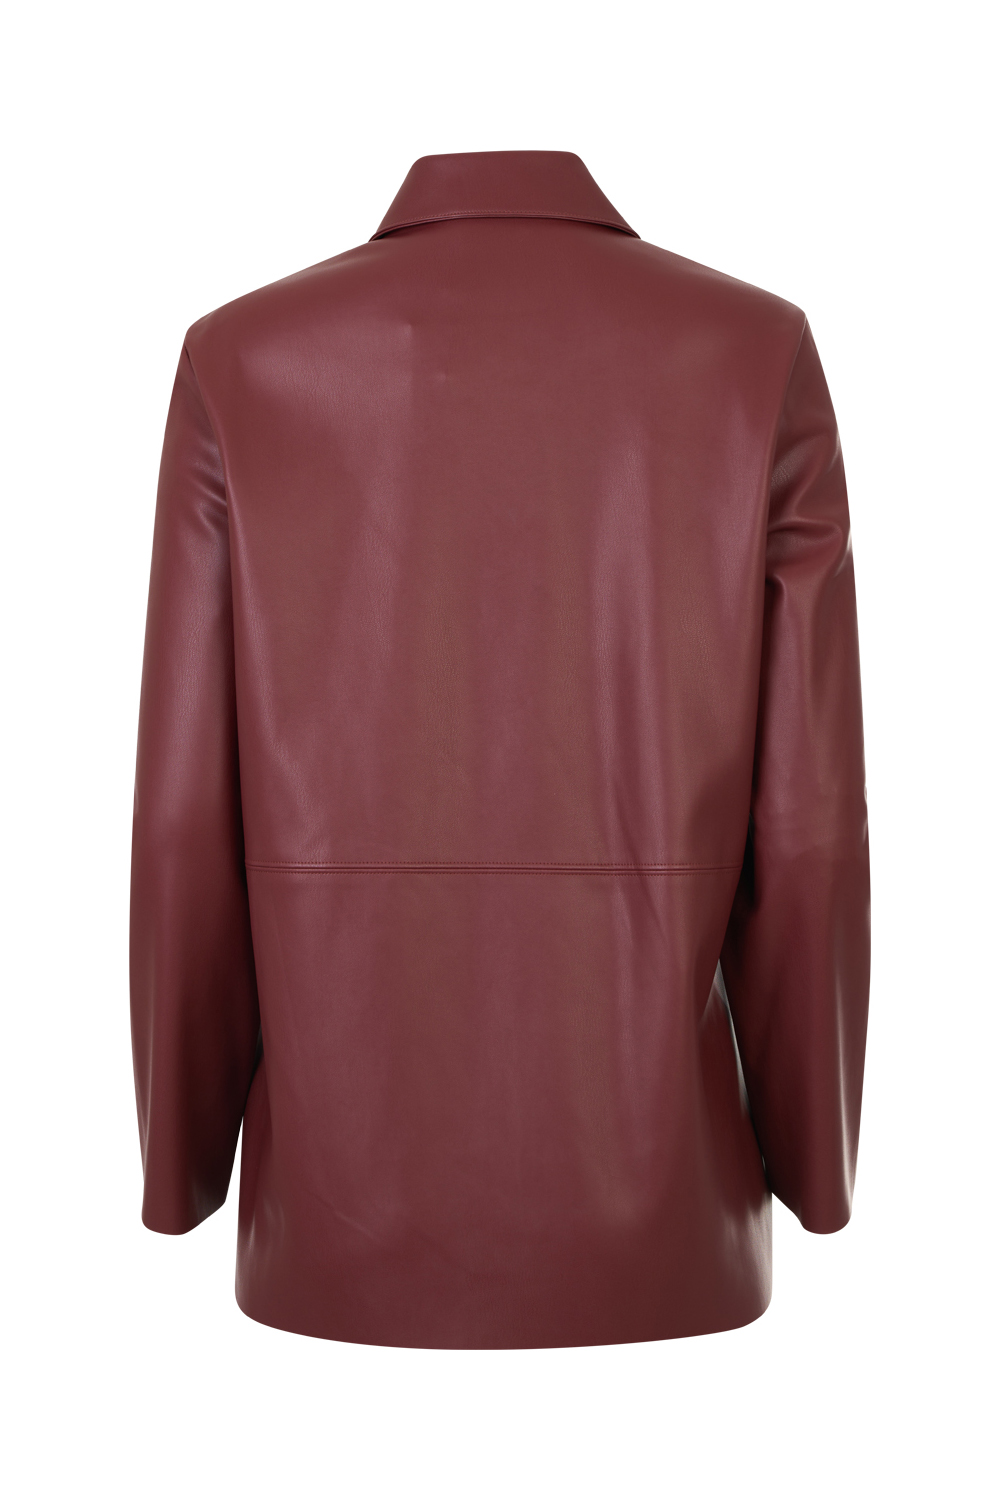 Eco-Leather Shaket with Seam Details and Side Pockets – Maria Bellentani